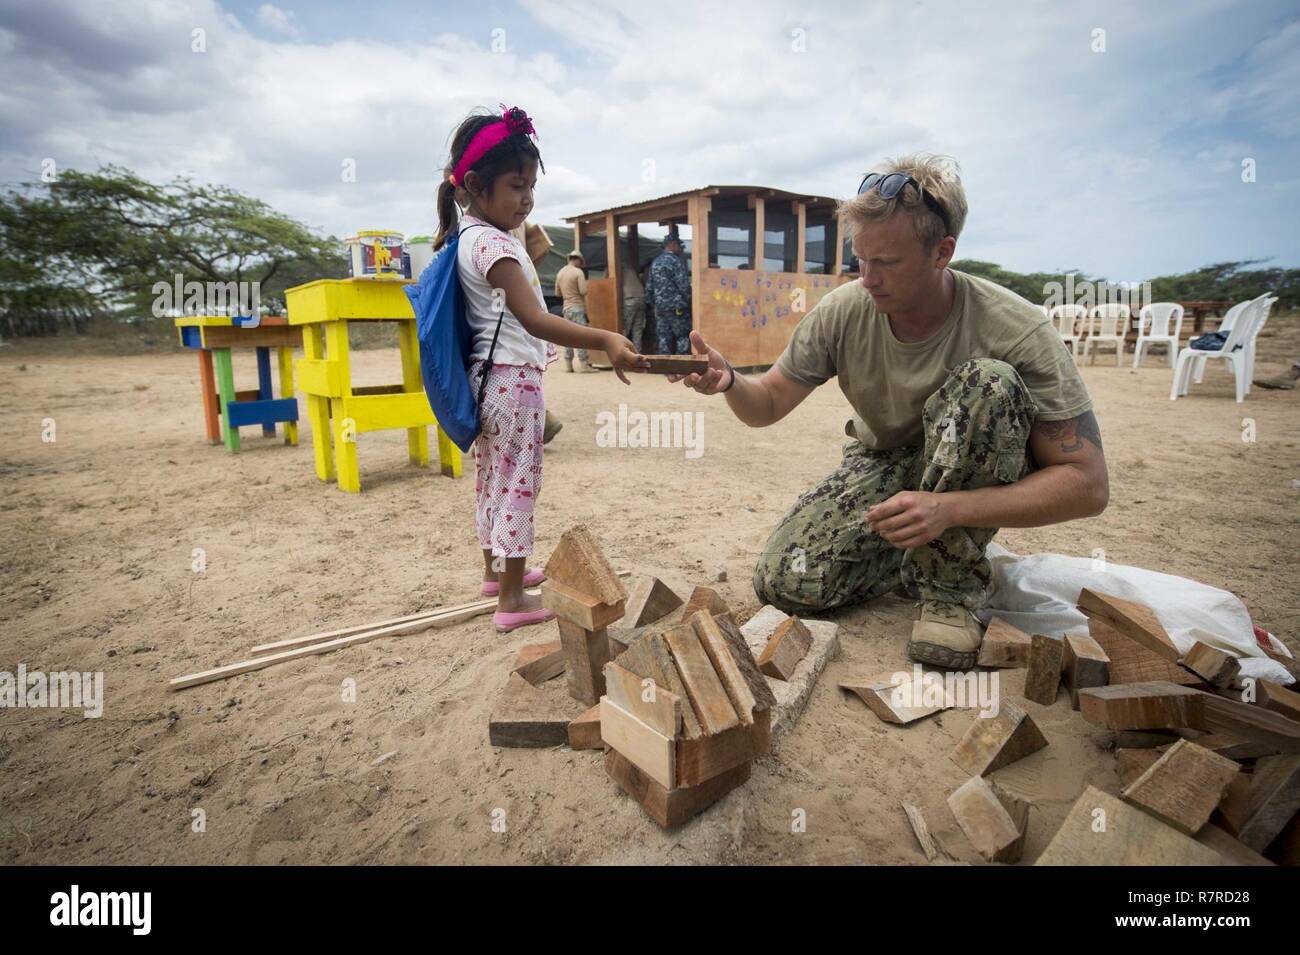 MAYAPO, Colombia (March 30, 2017) - Utilitiesman 2nd Class Elliott Shultz, a native of Indianapolis assigned to Construction Battalion Maintenance Unit (CBMU) 202, Norfolk, Va., plays with a child from a Wayuu tribe in Mayapo, Colombia, during Continuing Promise 2017 (CP-17). CP-17 is a U.S. Southern Command-sponsored and U.S. Naval Forces Southern Command/U.S. 4th Fleet-conducted deployment to conduct civil-military operations including humanitarian assistance, training engagements, medical, dental, and veterinary support in an effort to show U.S. support and commitment to Central and South A Stock Photo